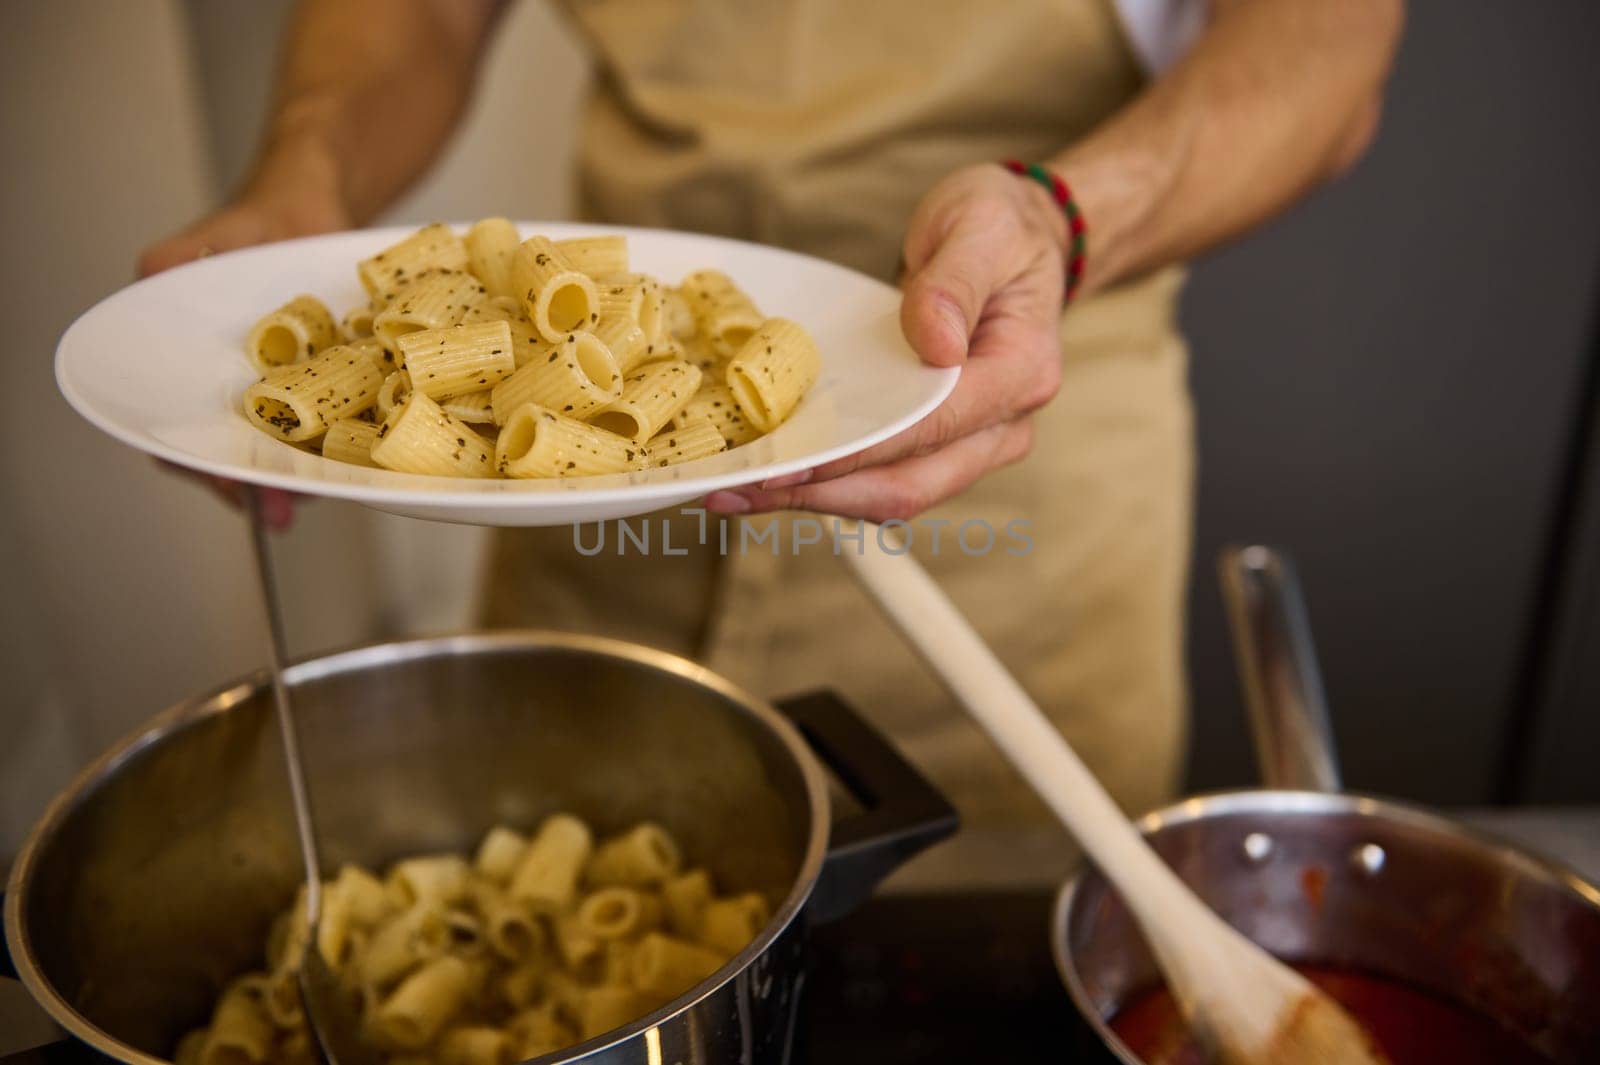 Male chef plating up Italian pasta before serving for customers. Close-up. Food and drink consumerism. Culinary. Epicure by artgf